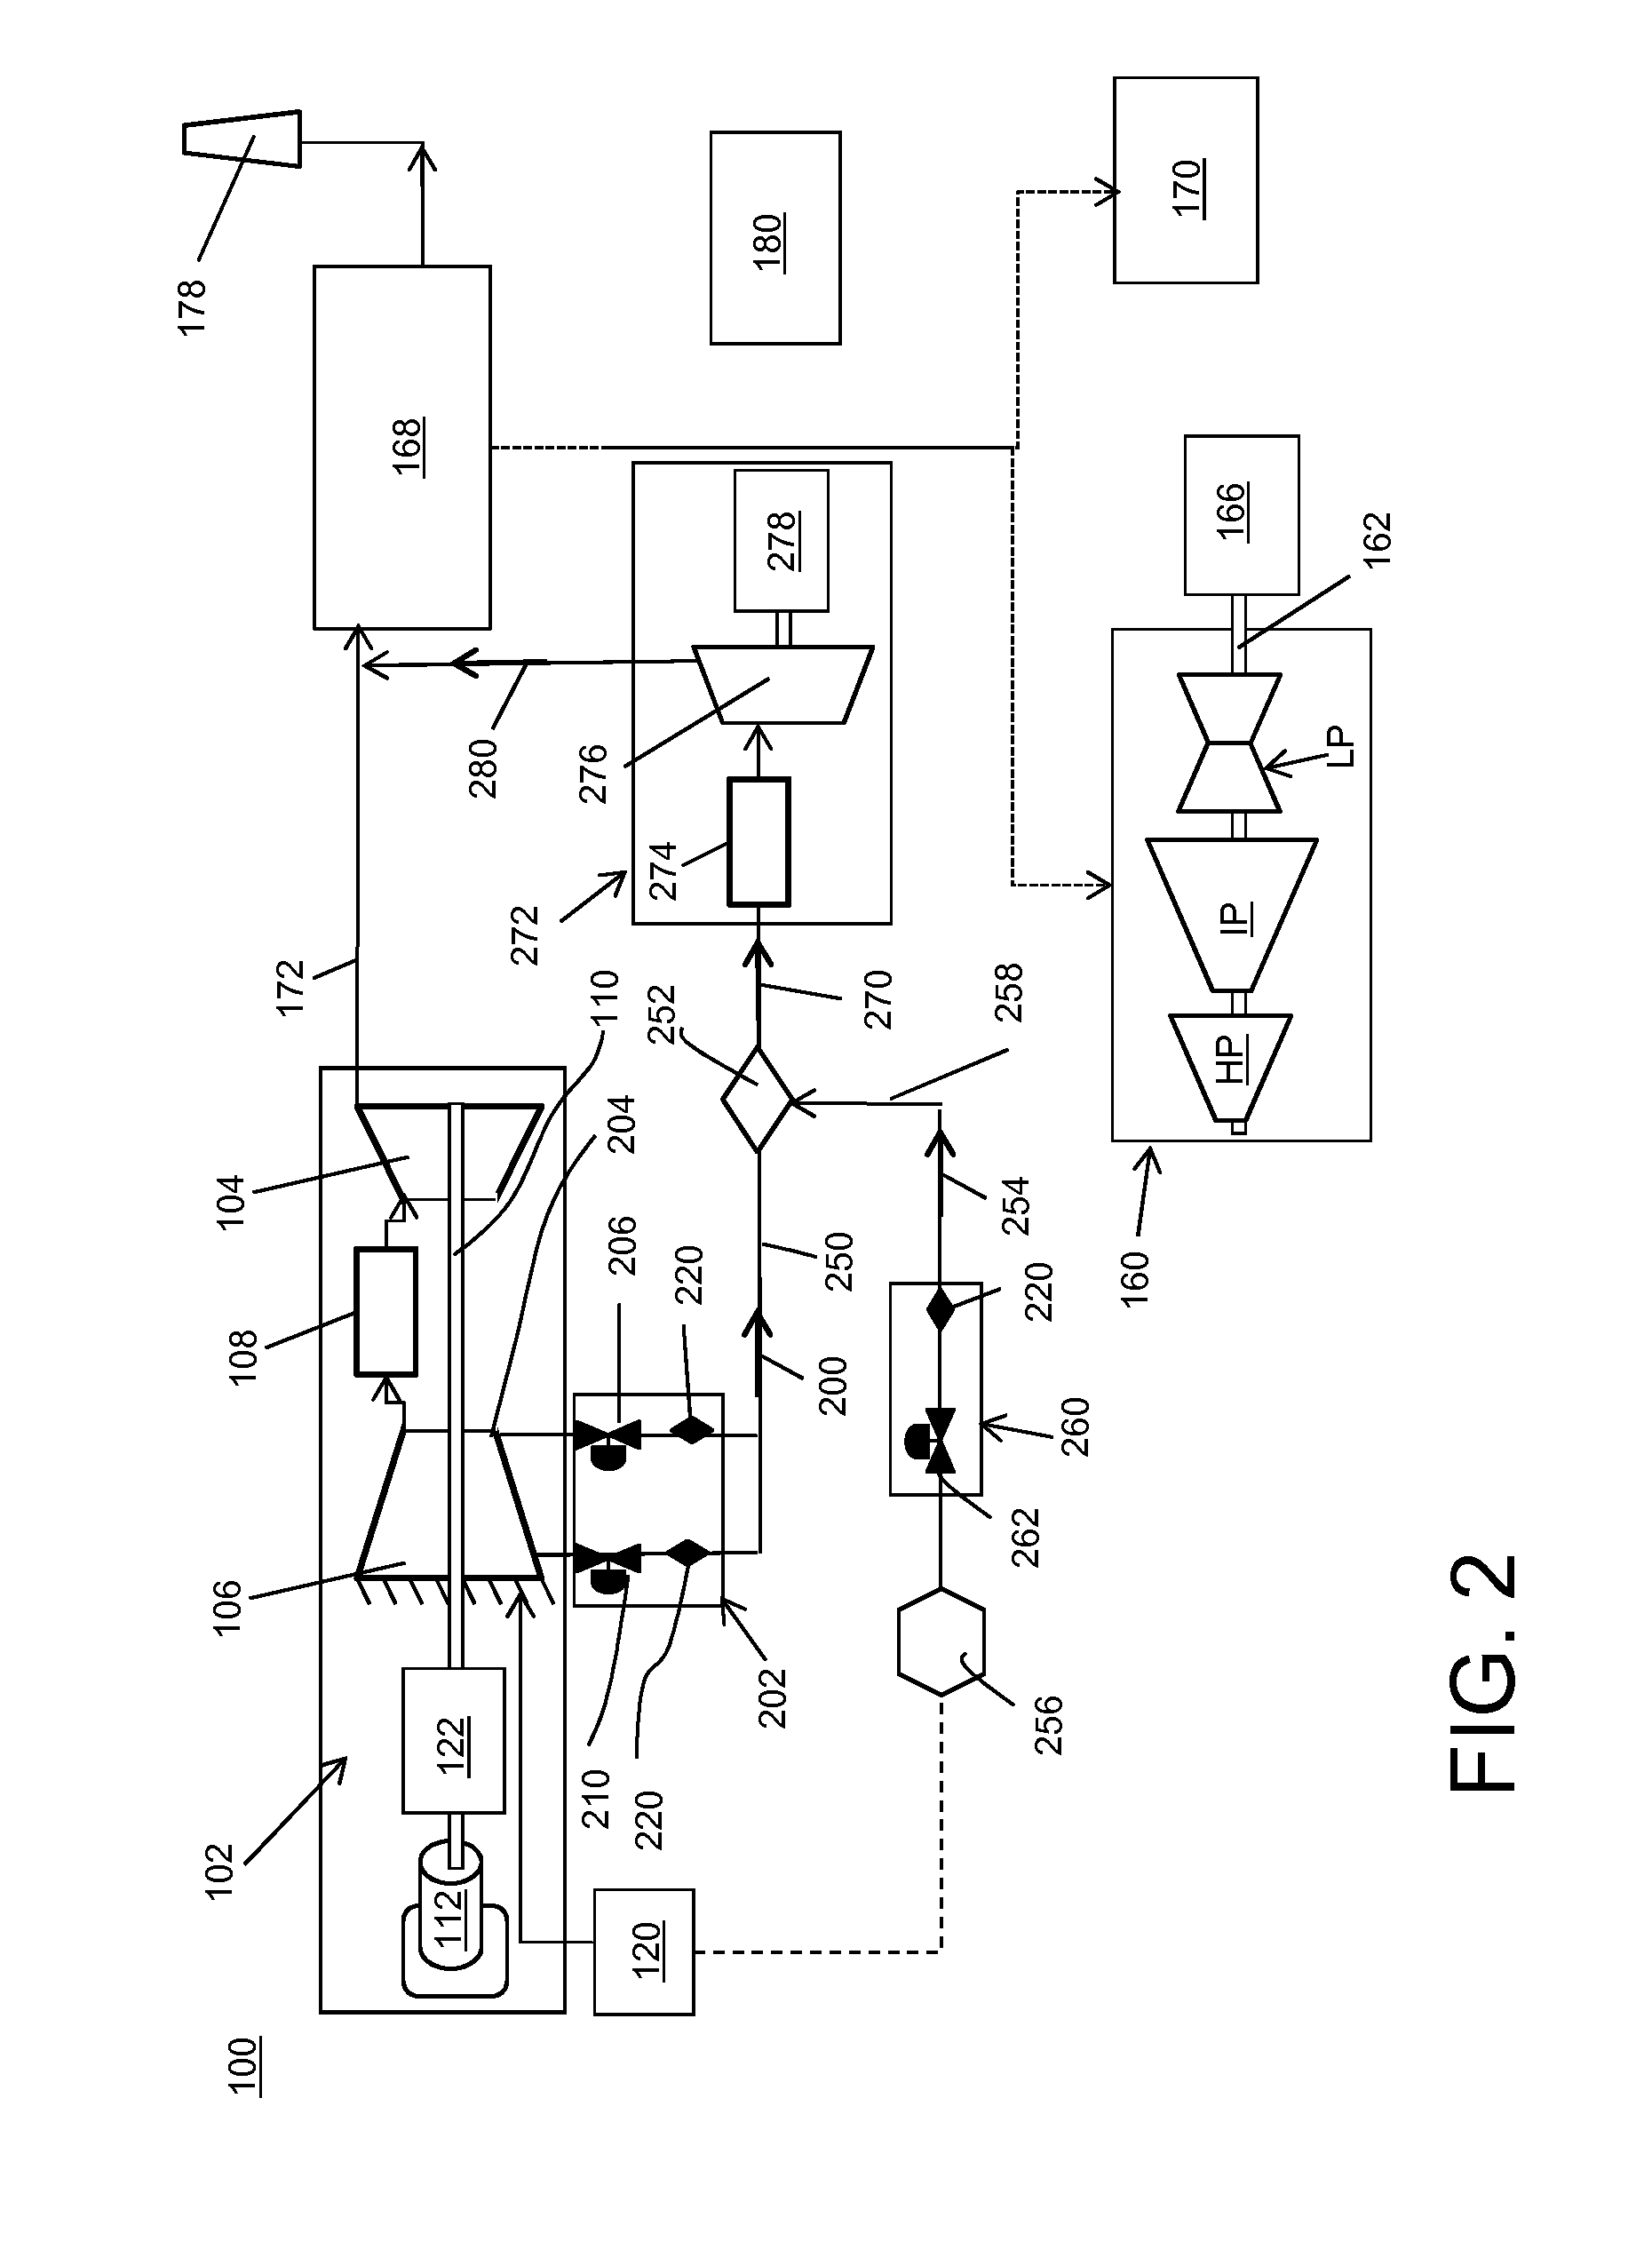 Power generation system having compressor creating excess gas flow for supplemental gas turbine system